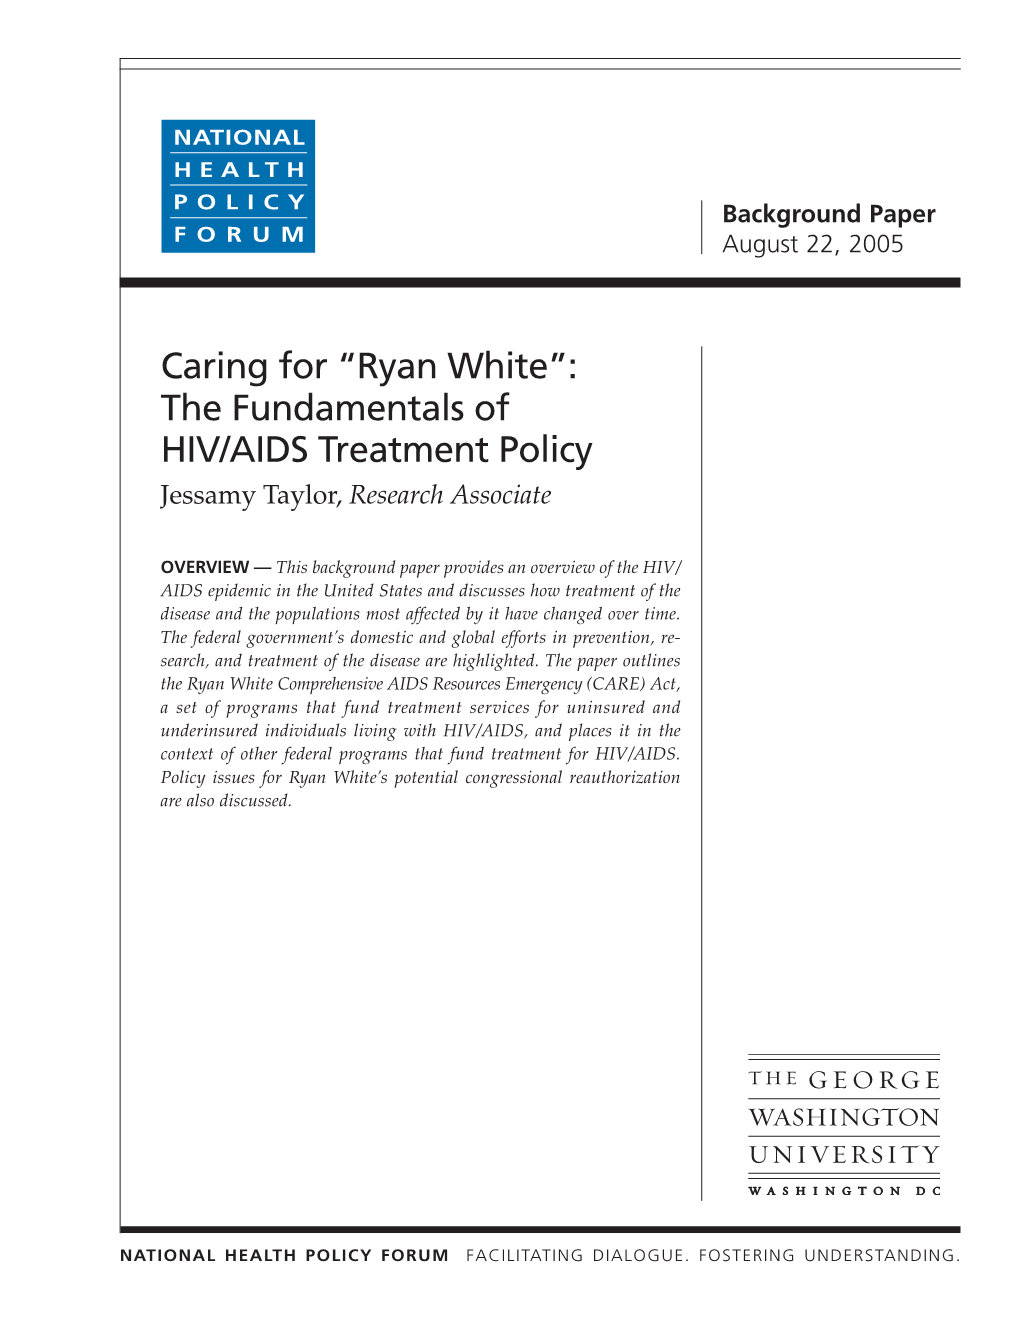 Ryan White”: the Fundamentals of HIV/AIDS Treatment Policy Jessamy Taylor, Research Associate